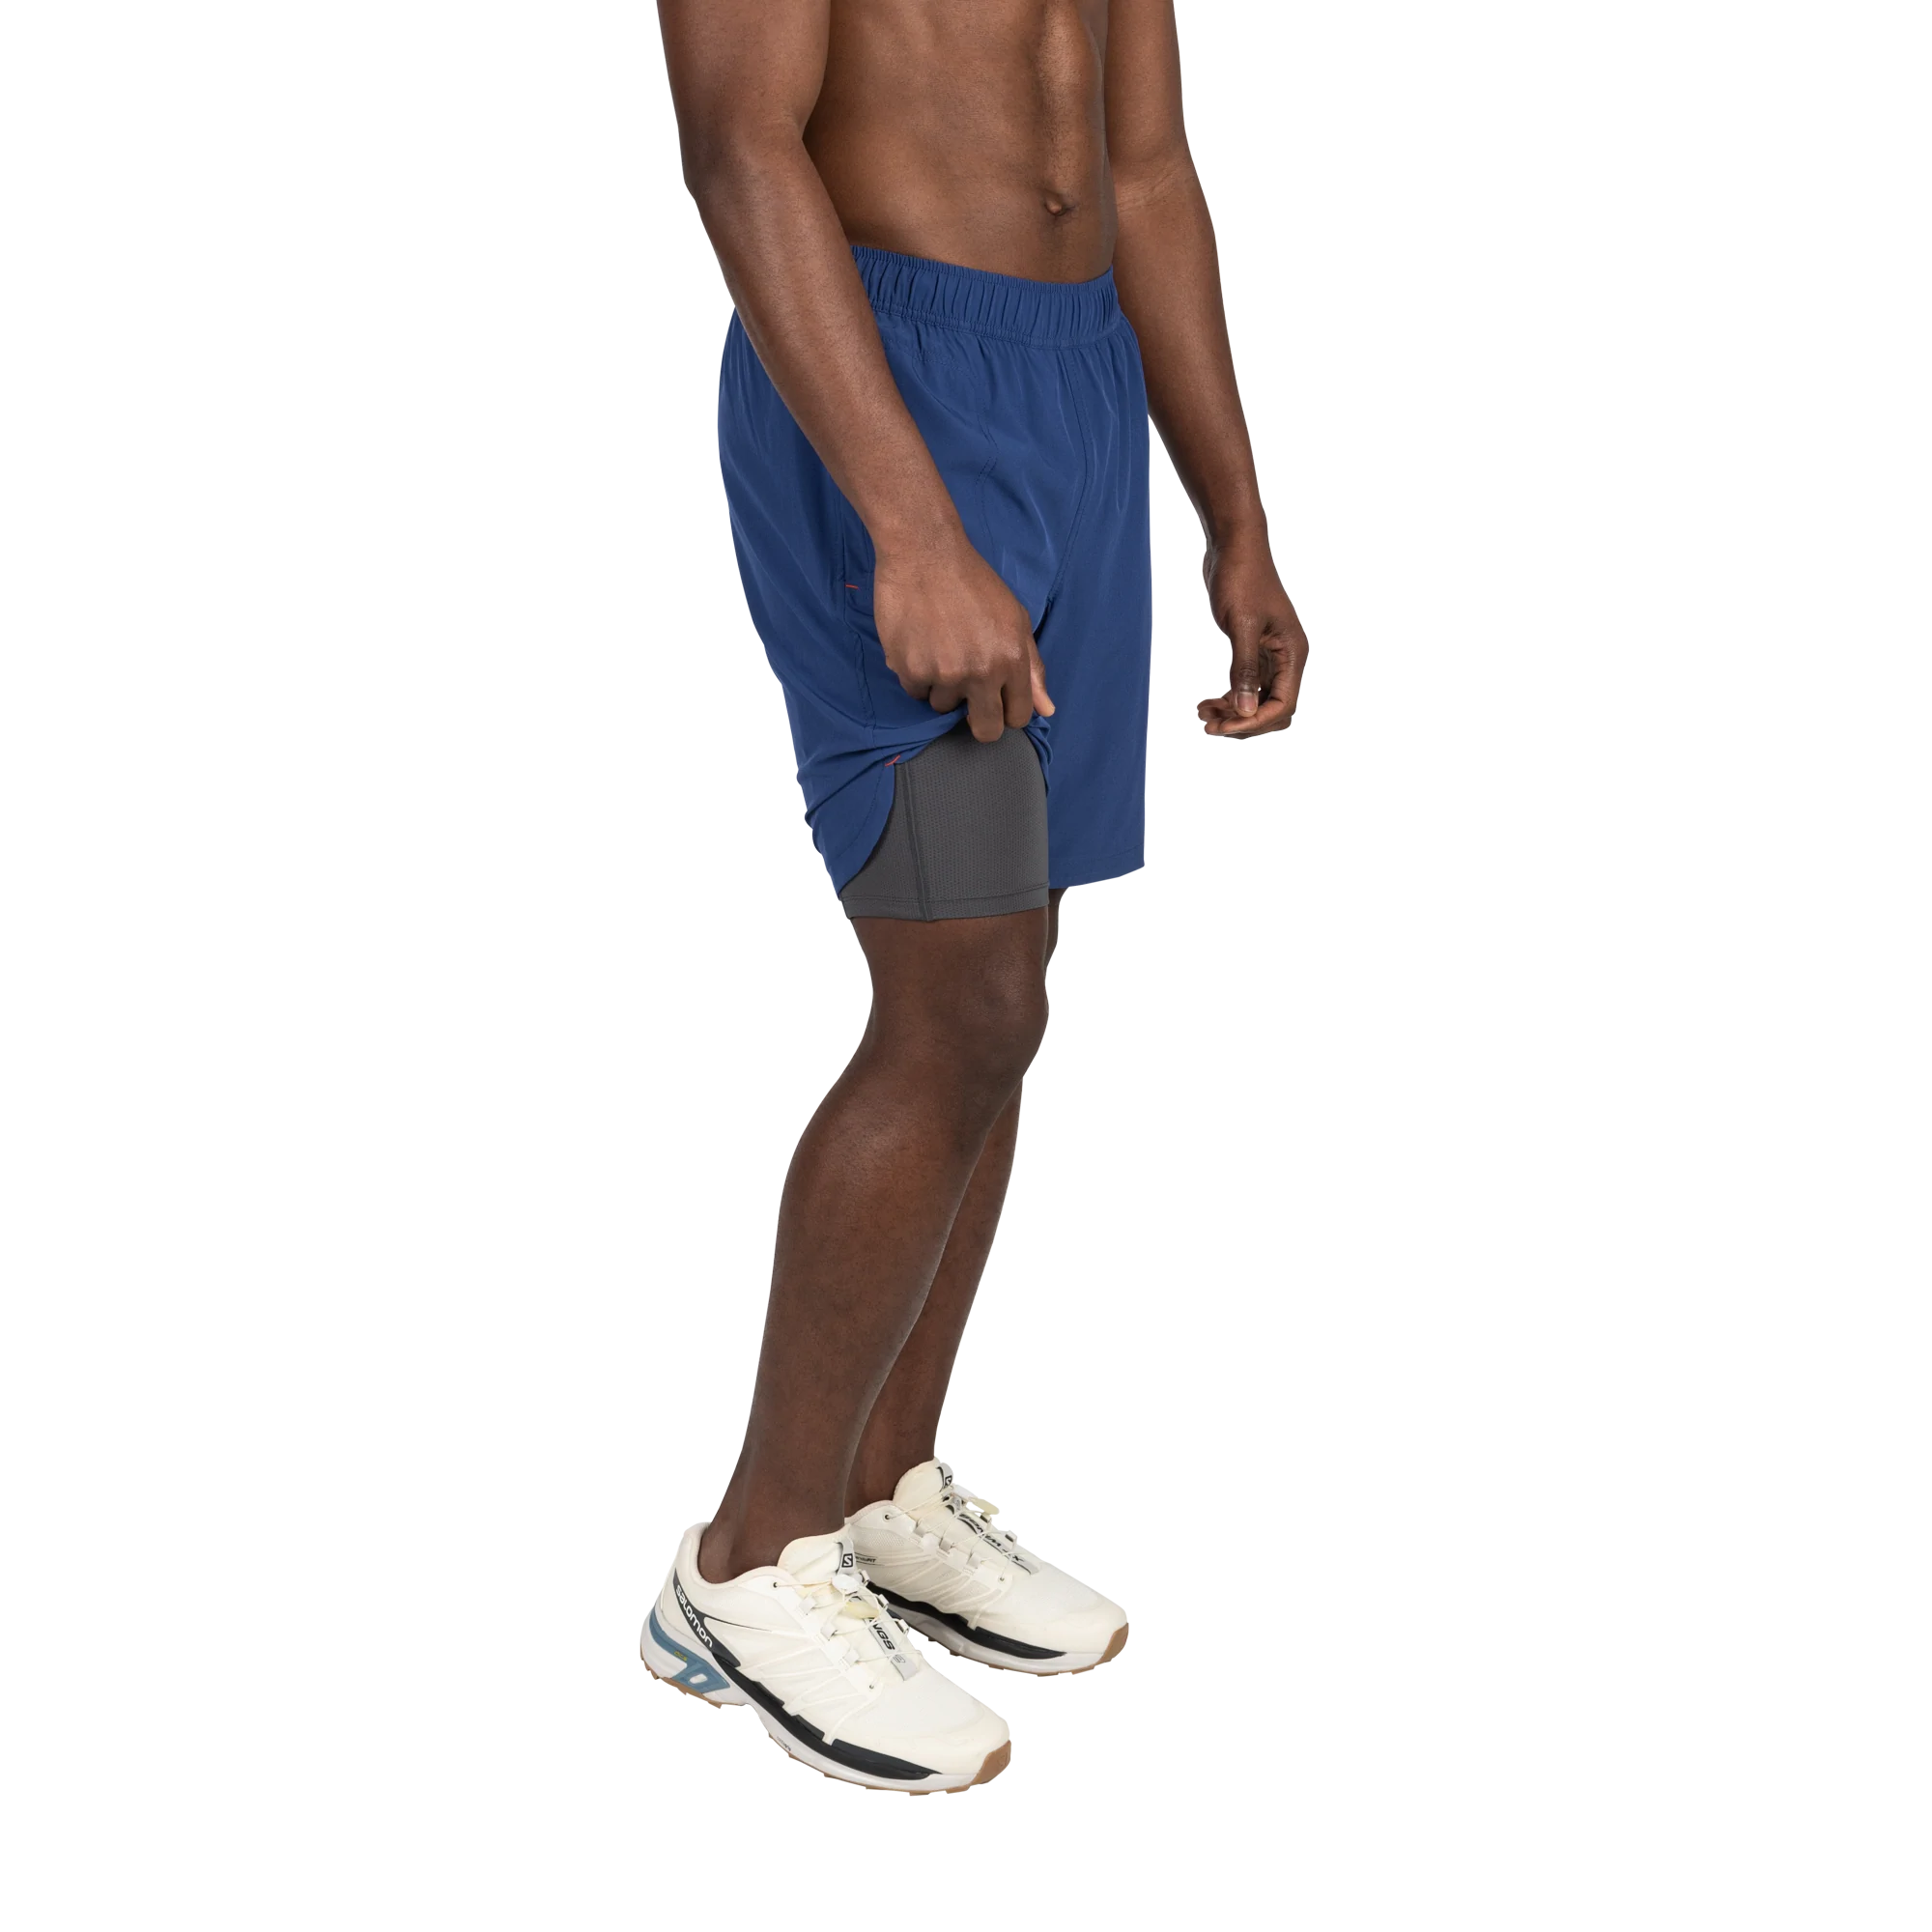 Front - Model wearing Gainmaker 2N1 Short 9" in Blueberry with liner